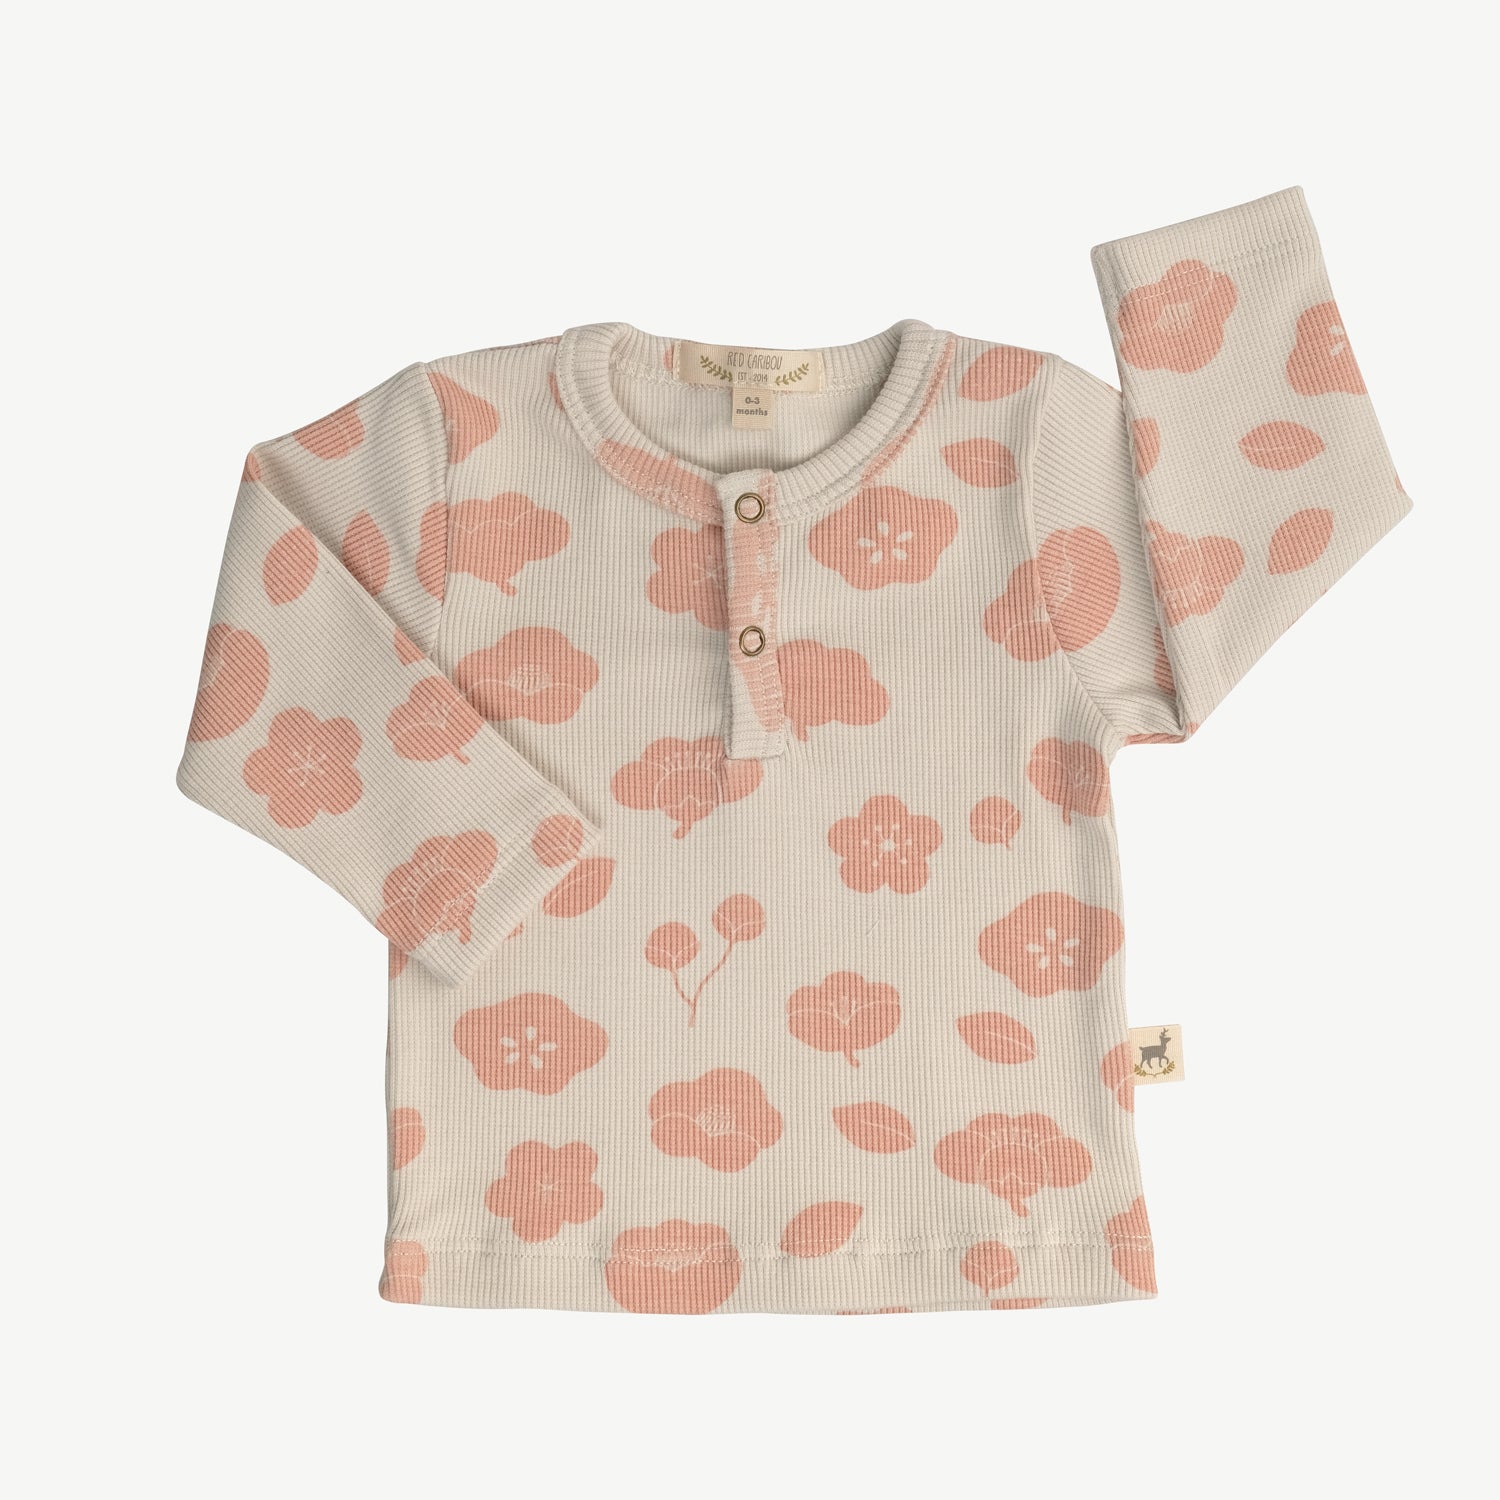 'plums in bloom' white sand rib henley